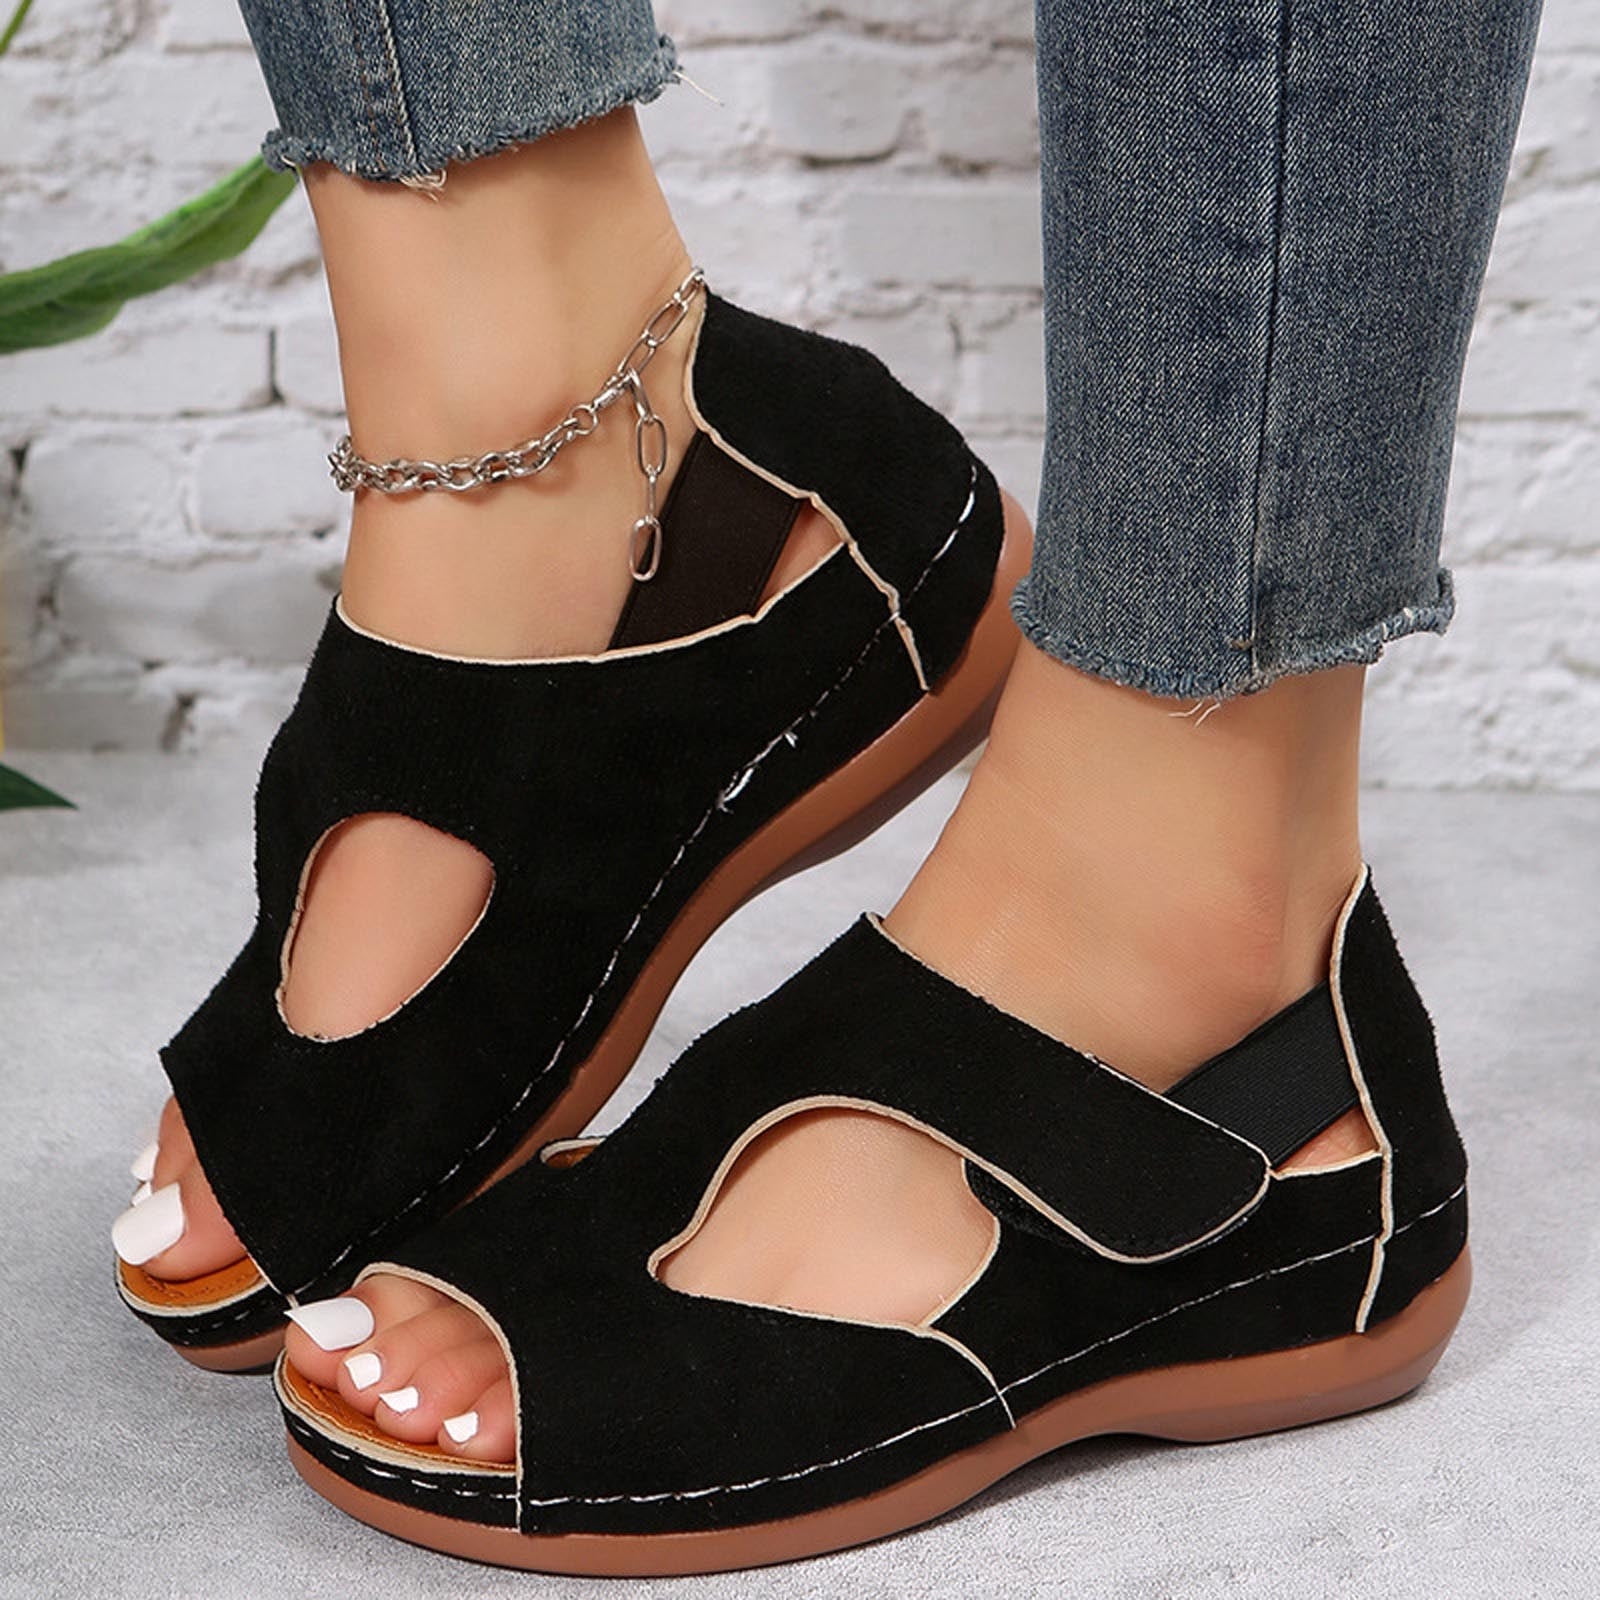 CTEEGC Clearance Promotion Sandals for Women Arch-Support Sandals Shoes  Beach Orthopedic Sandals Summer Non-Slip Causal Sandals 